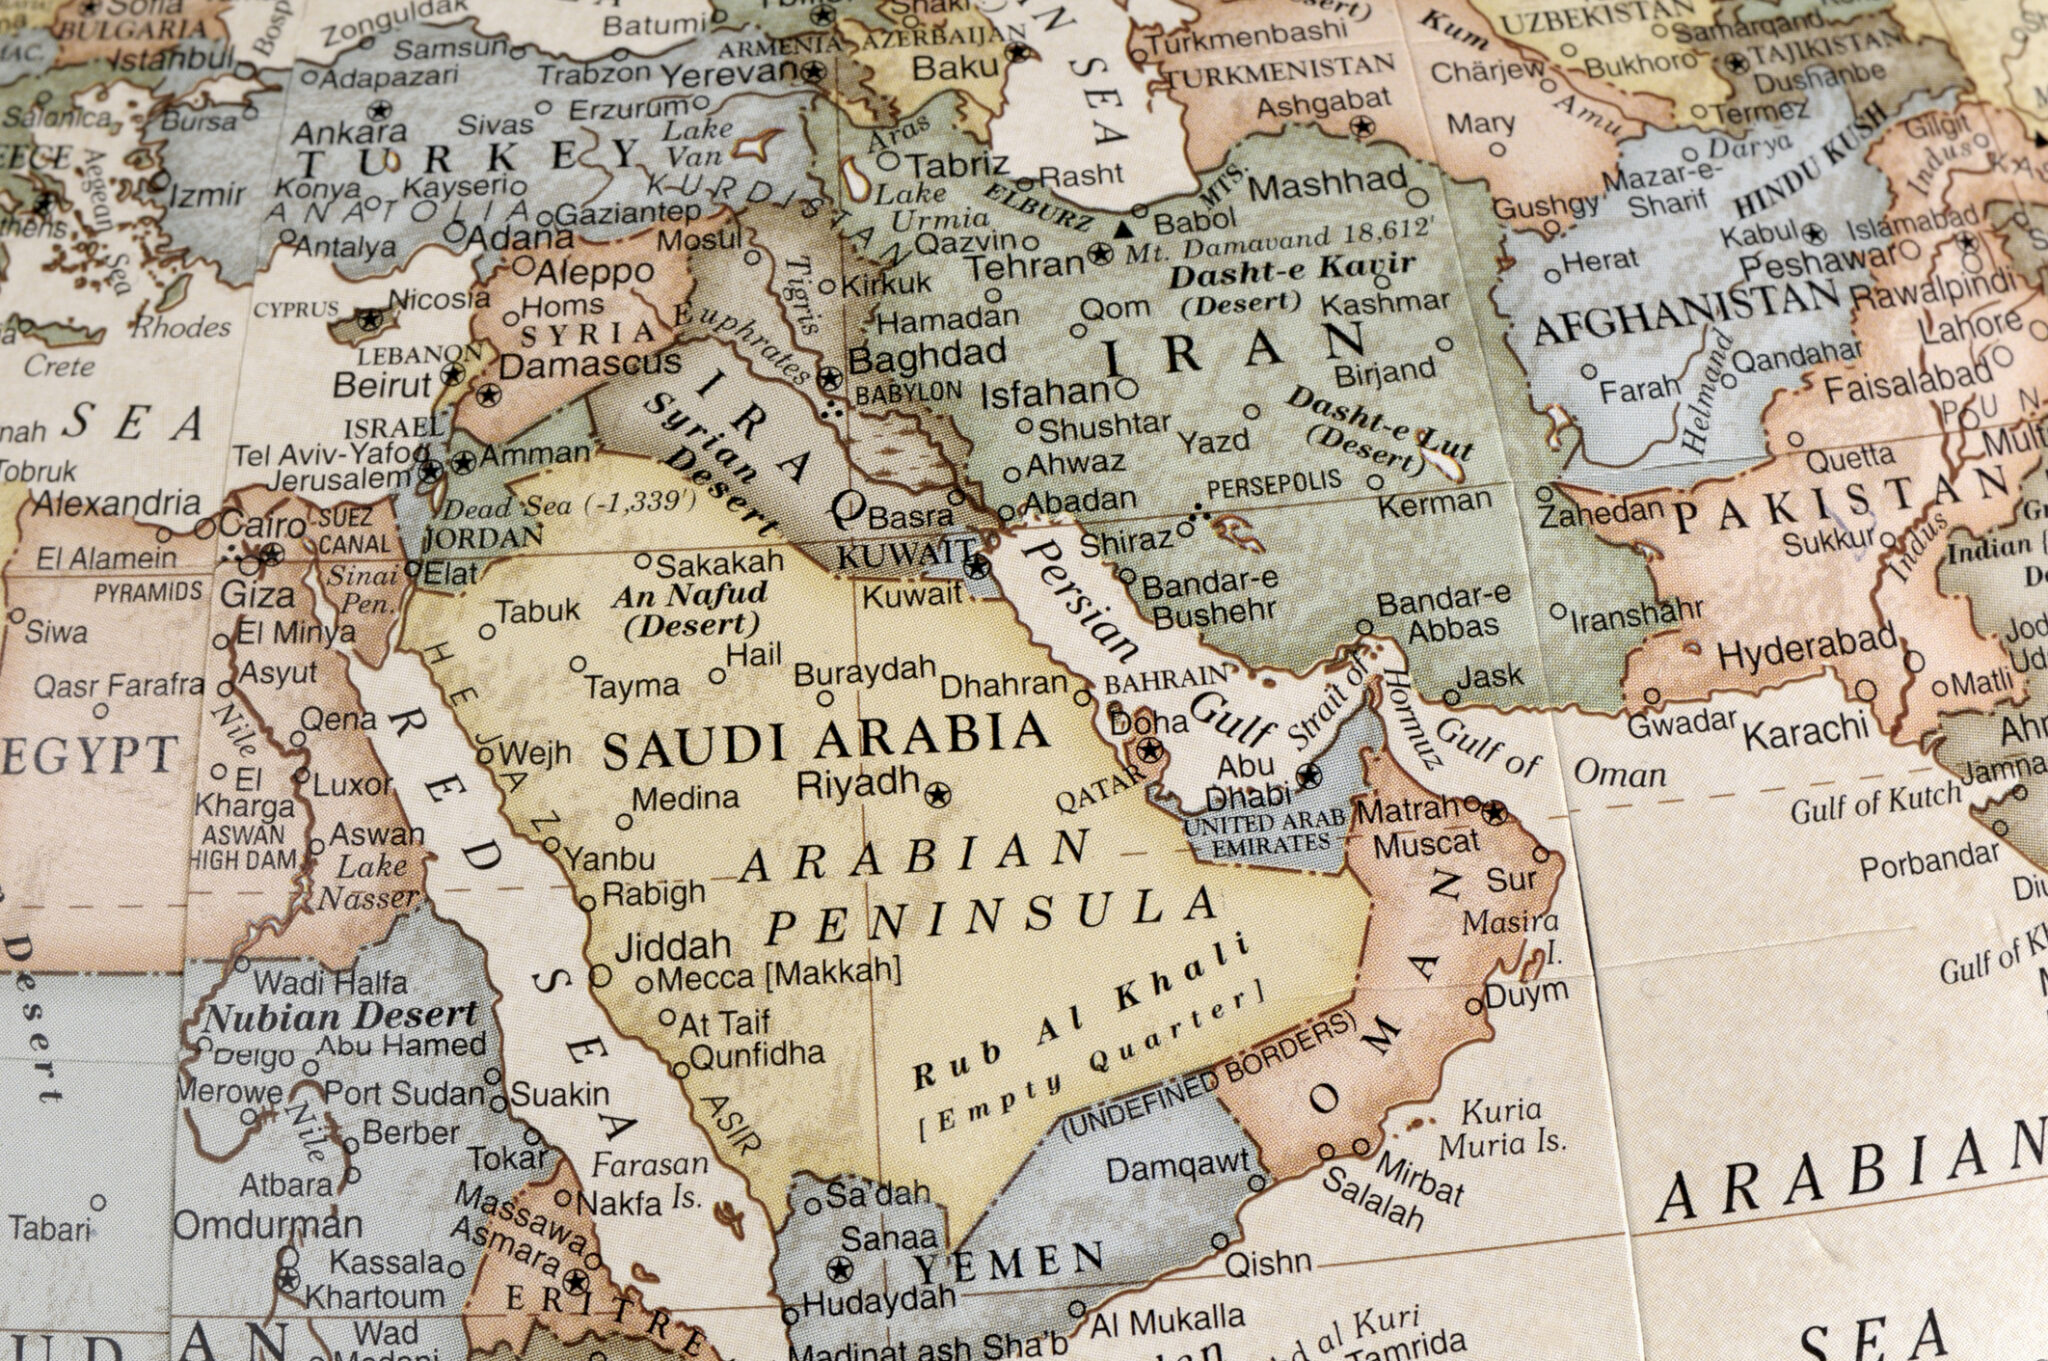 A Coming Year of Change in the Middle East